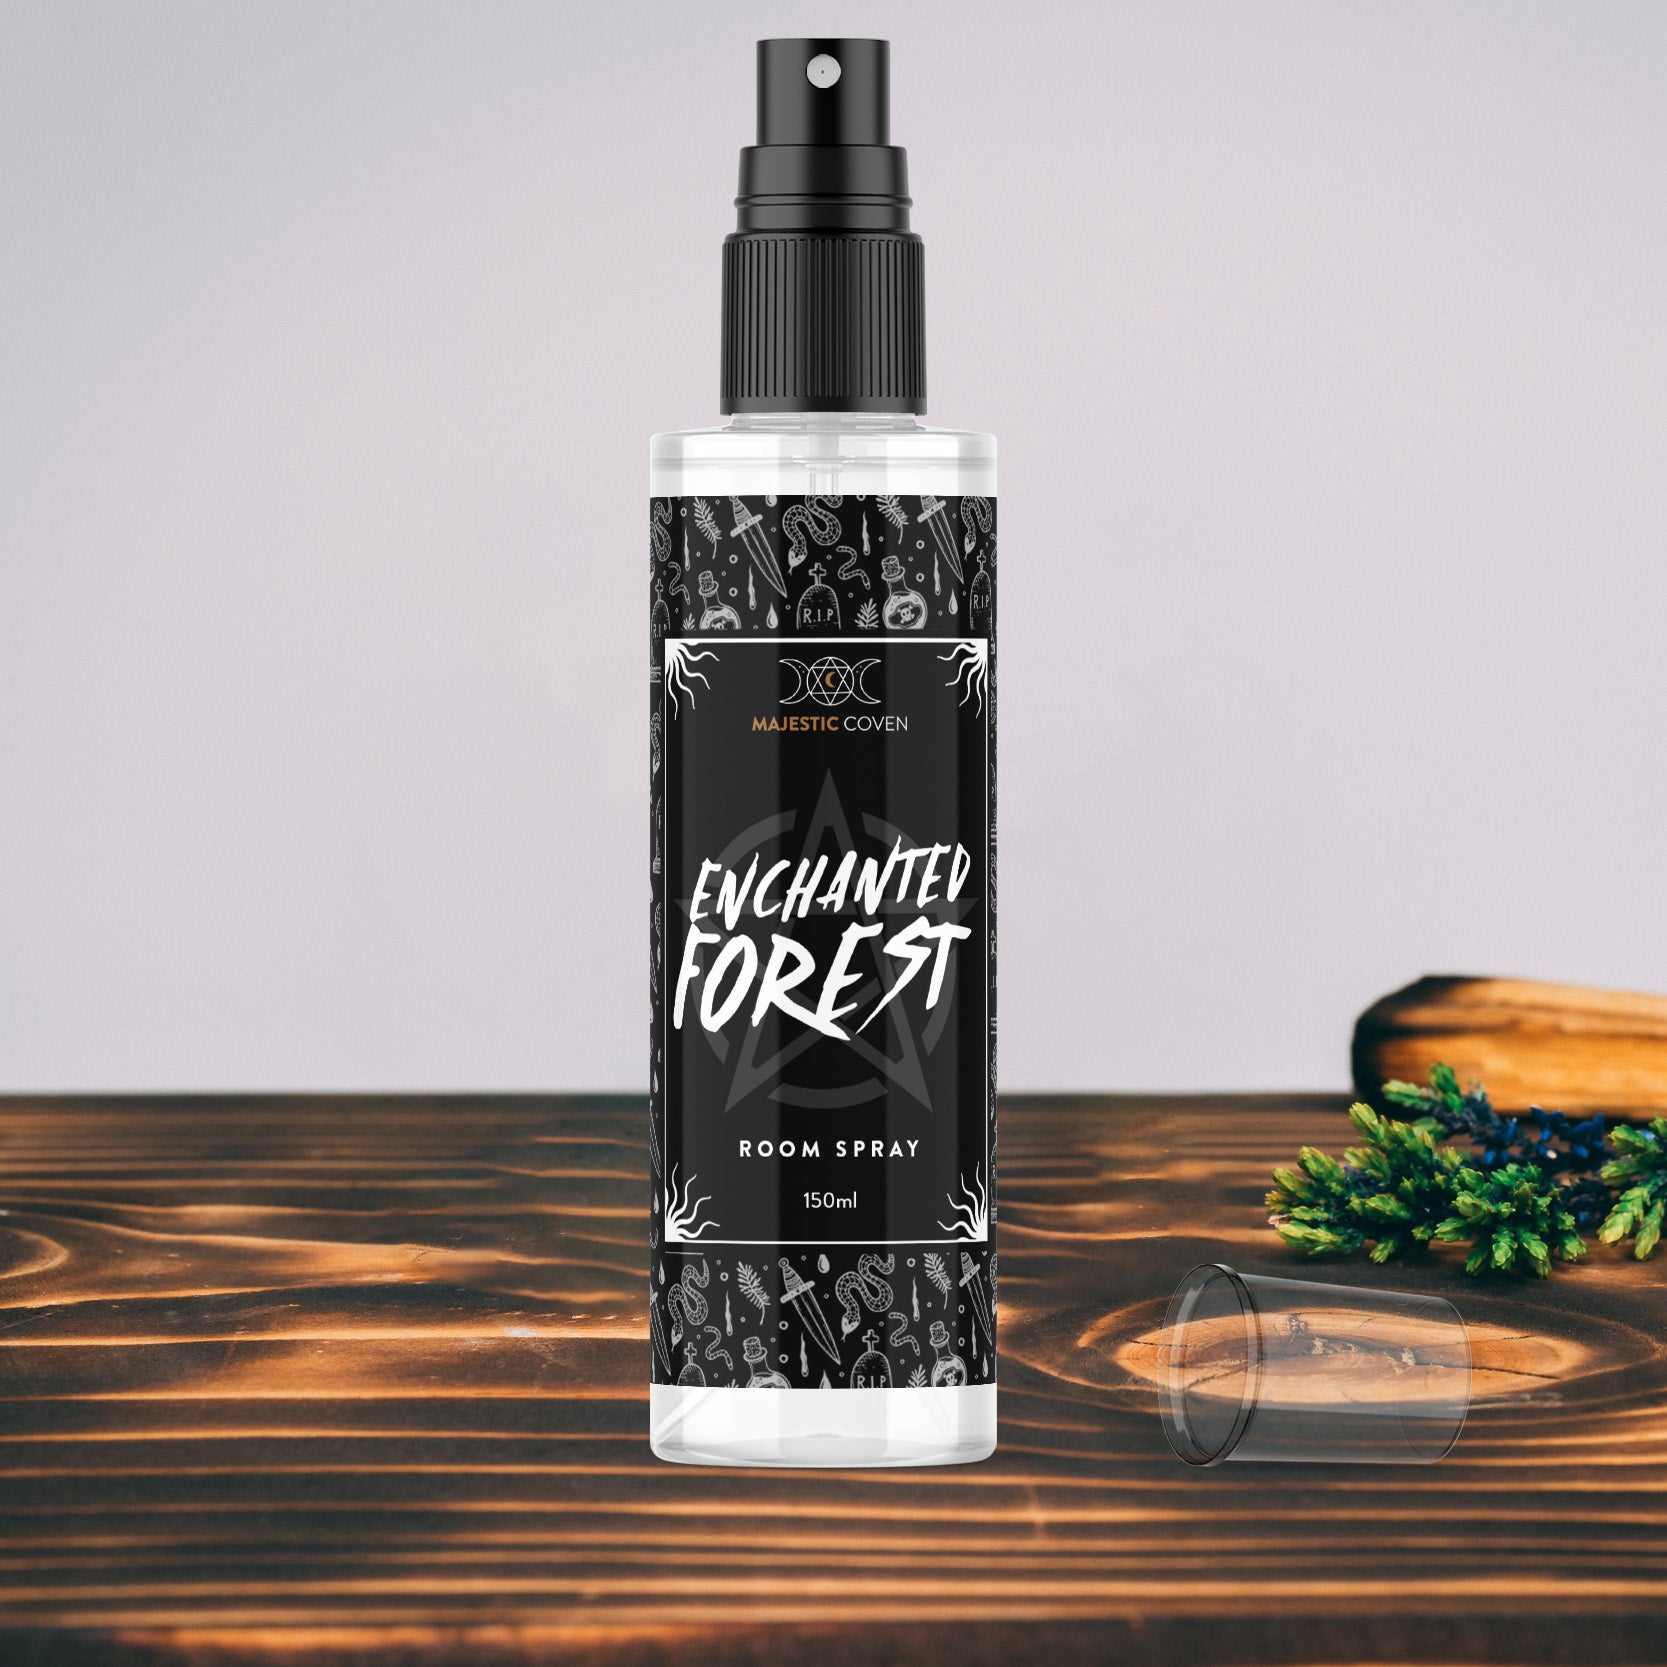 Enchanted Forest - Room Spray Majestic Coven